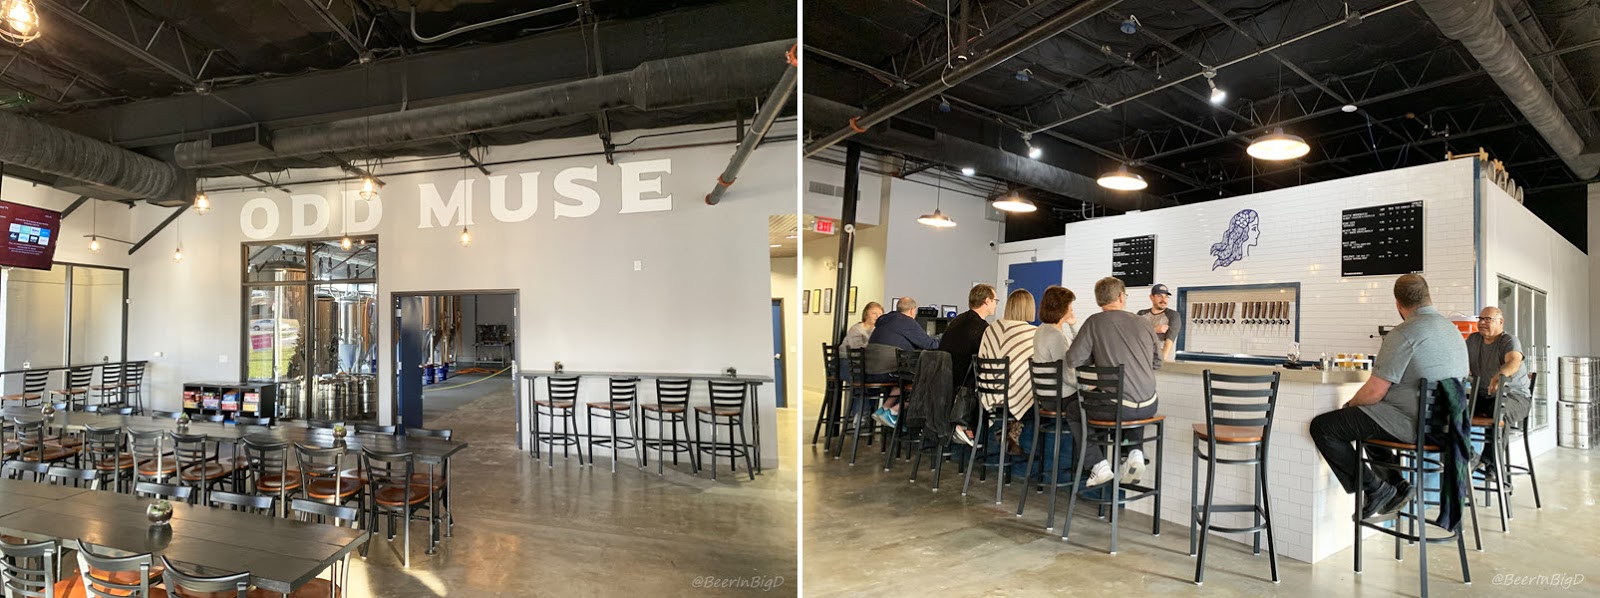 Odd Muse open for business in Farmers Branch Beer in Big D